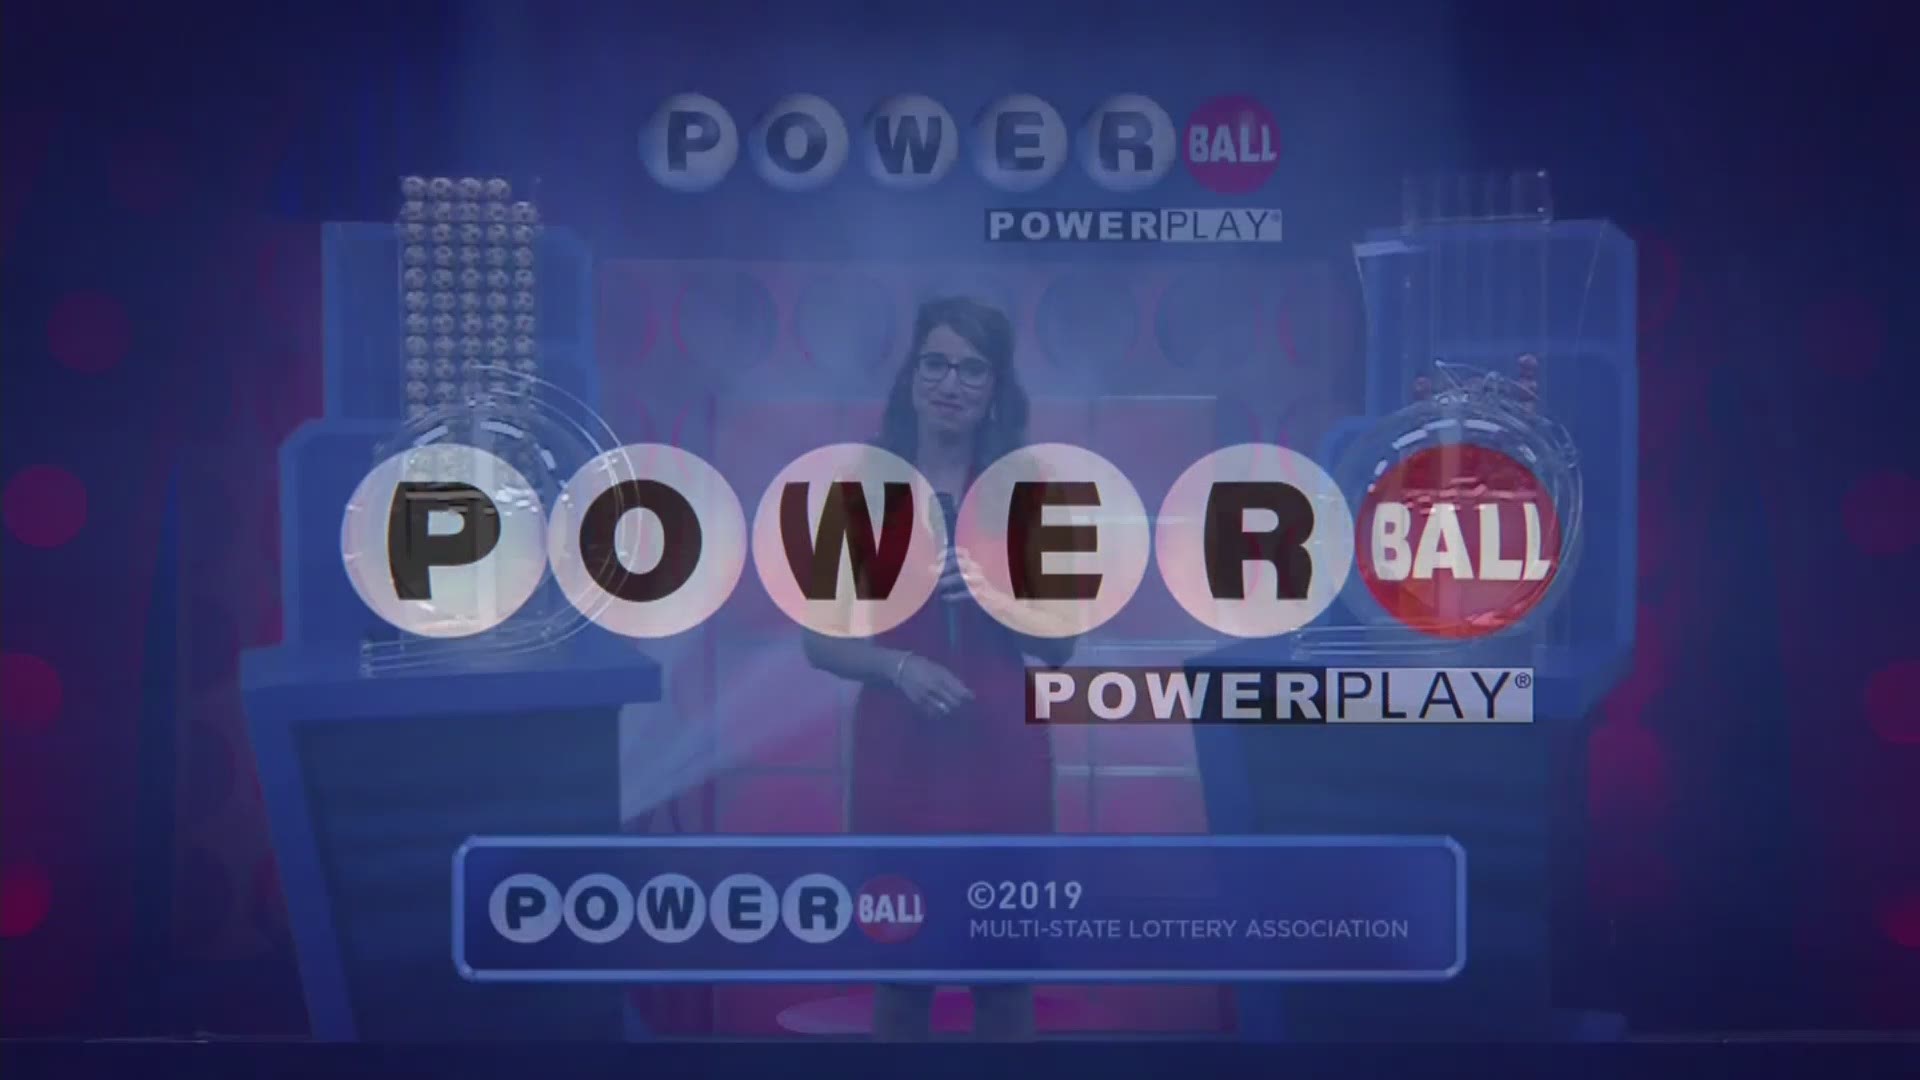 Here are the winning numbers for the Powerball drawing on July 10, 2019.